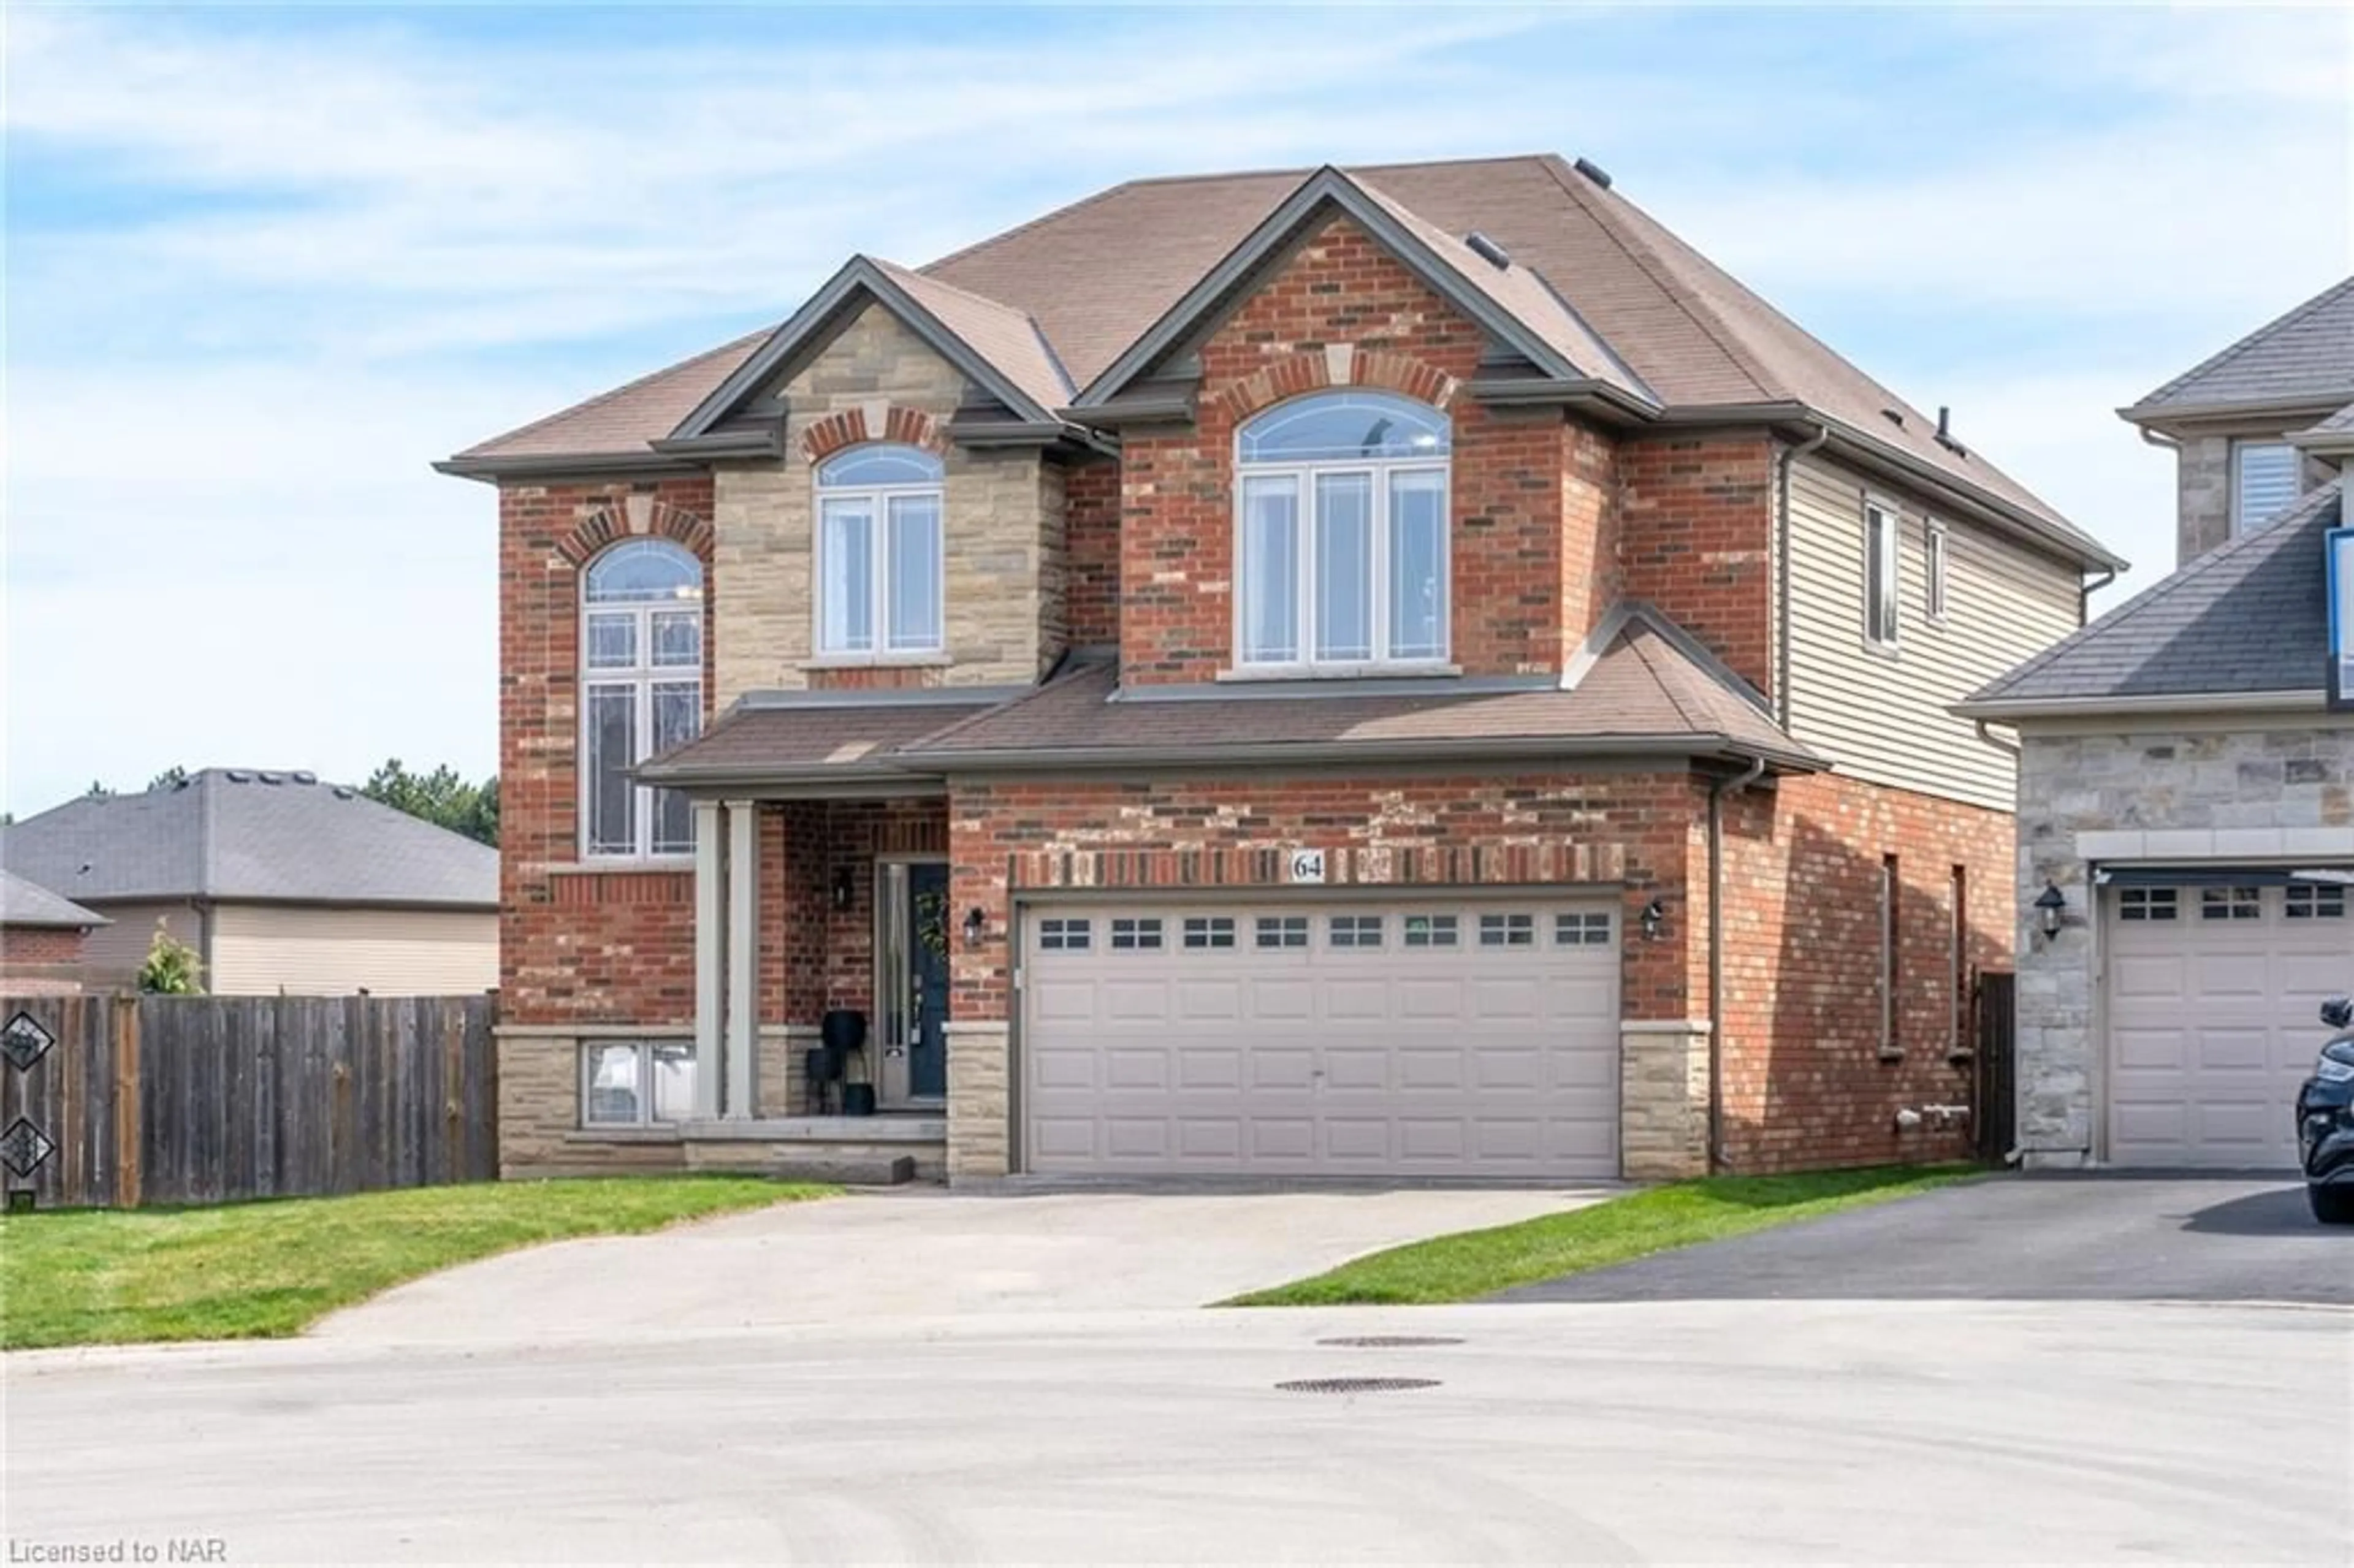 Home with brick exterior material for 64 Tulip St, Grimsby Ontario L3M 5M2